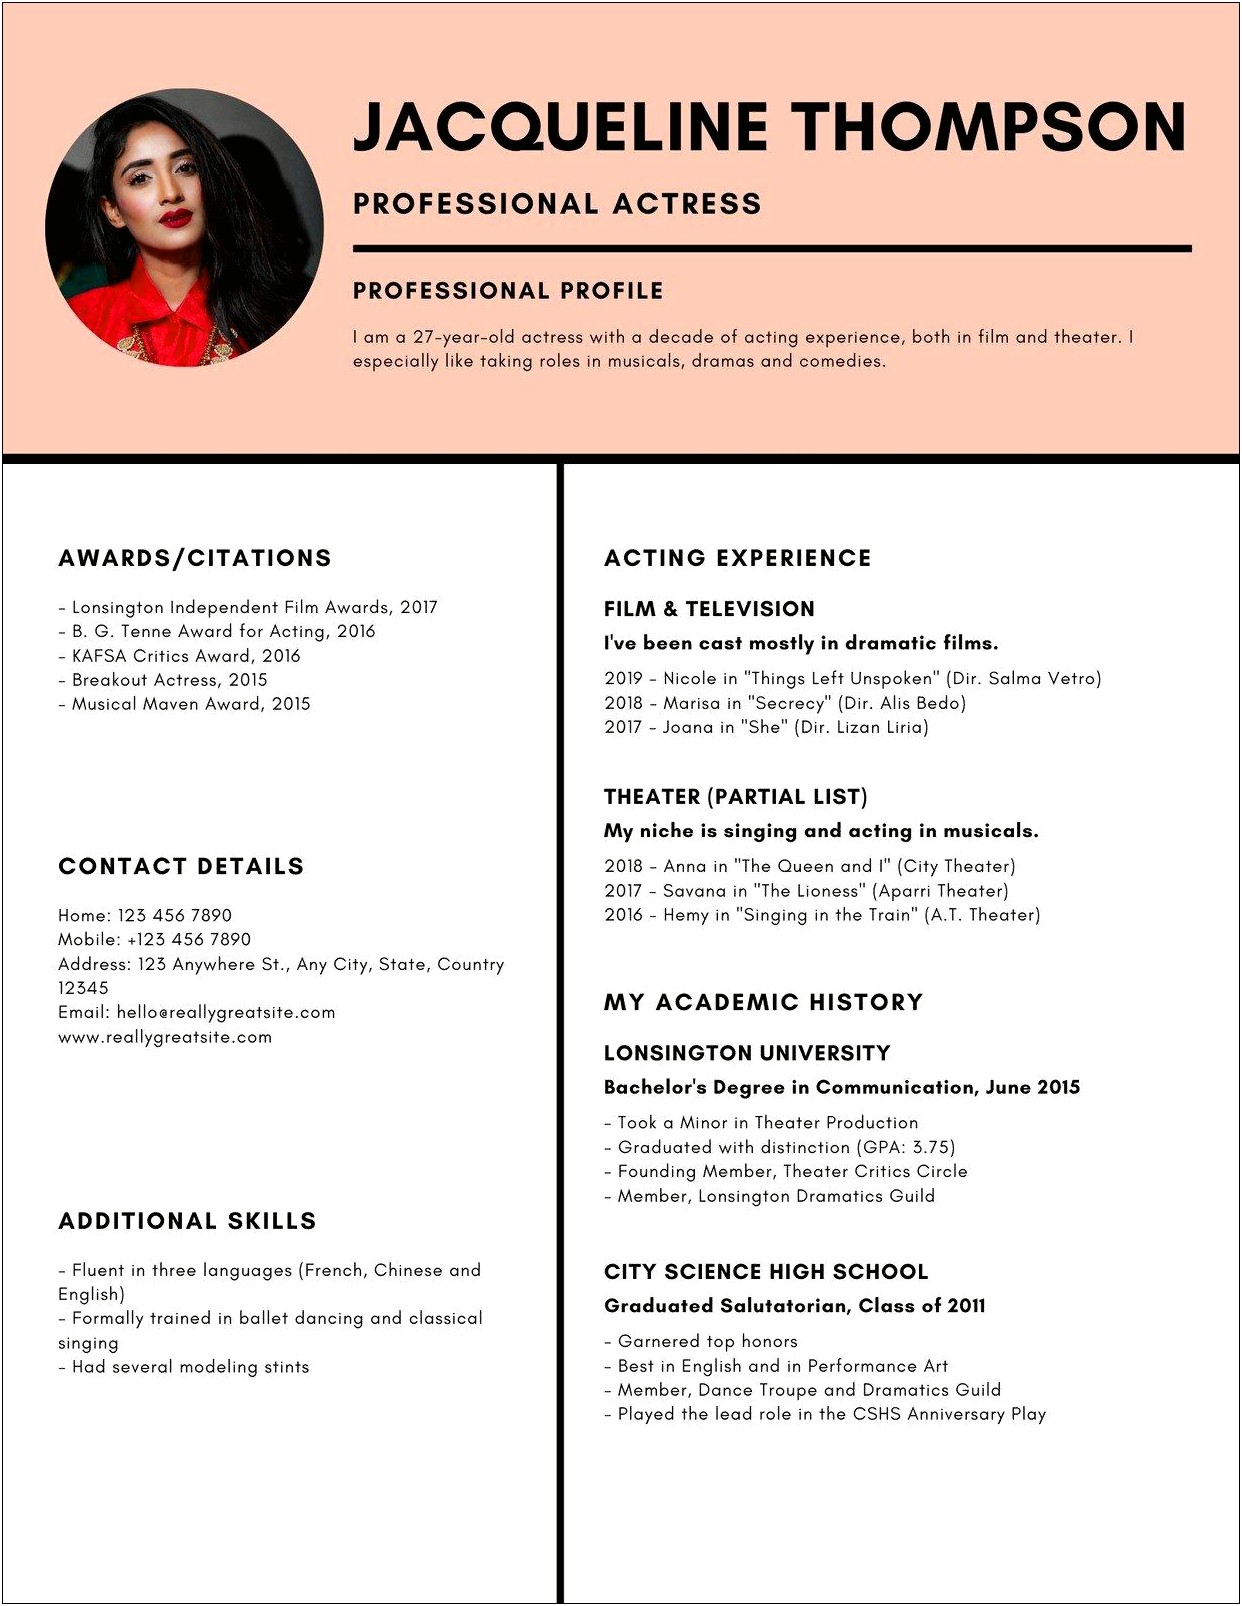 Additional Skills For Acting Resume